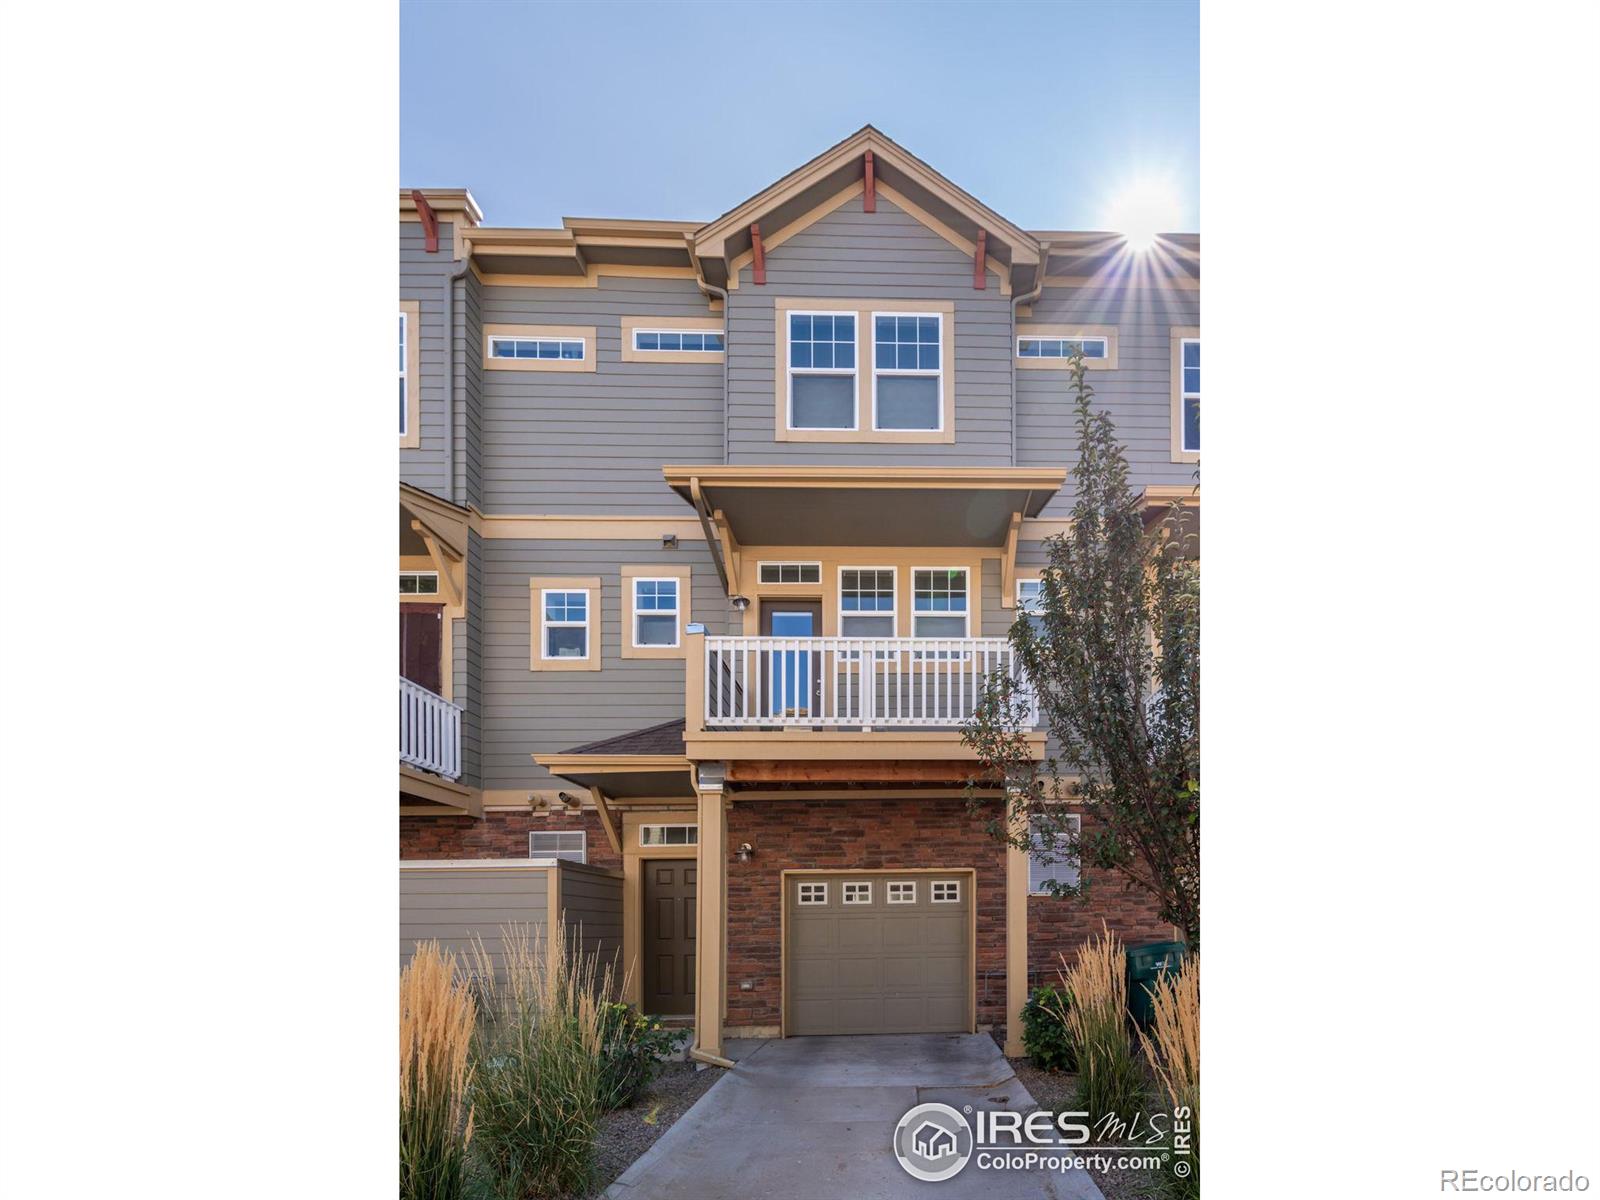 Report Image for 12900  King Street,Broomfield, Colorado